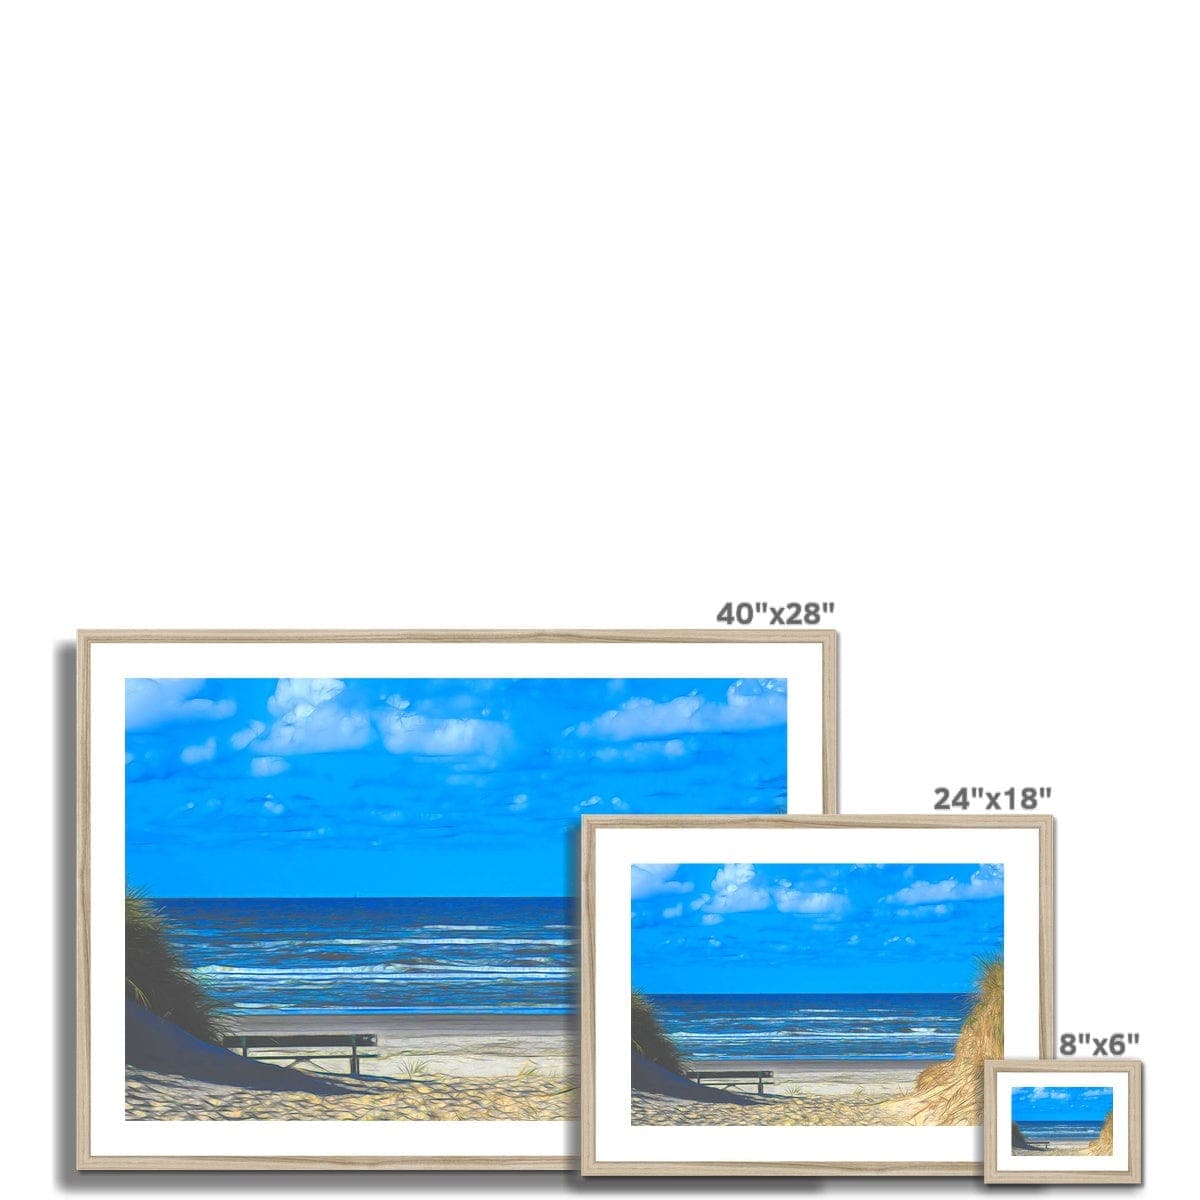 View at the North Sea, by Mother Nature Art Framed & Mounted Print